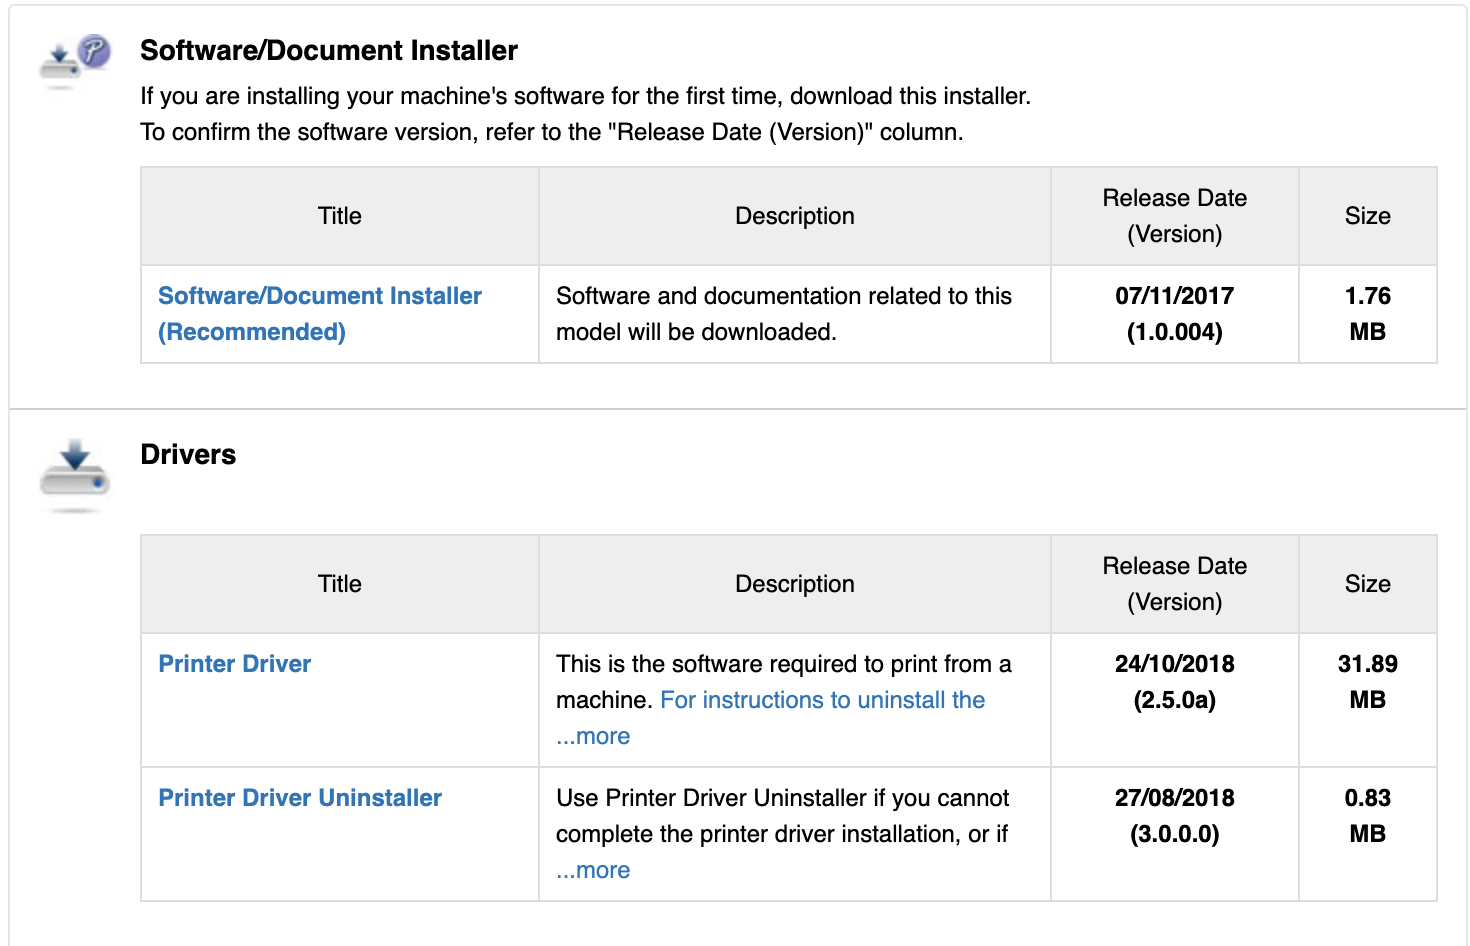 Install the Driver and the Document Installer